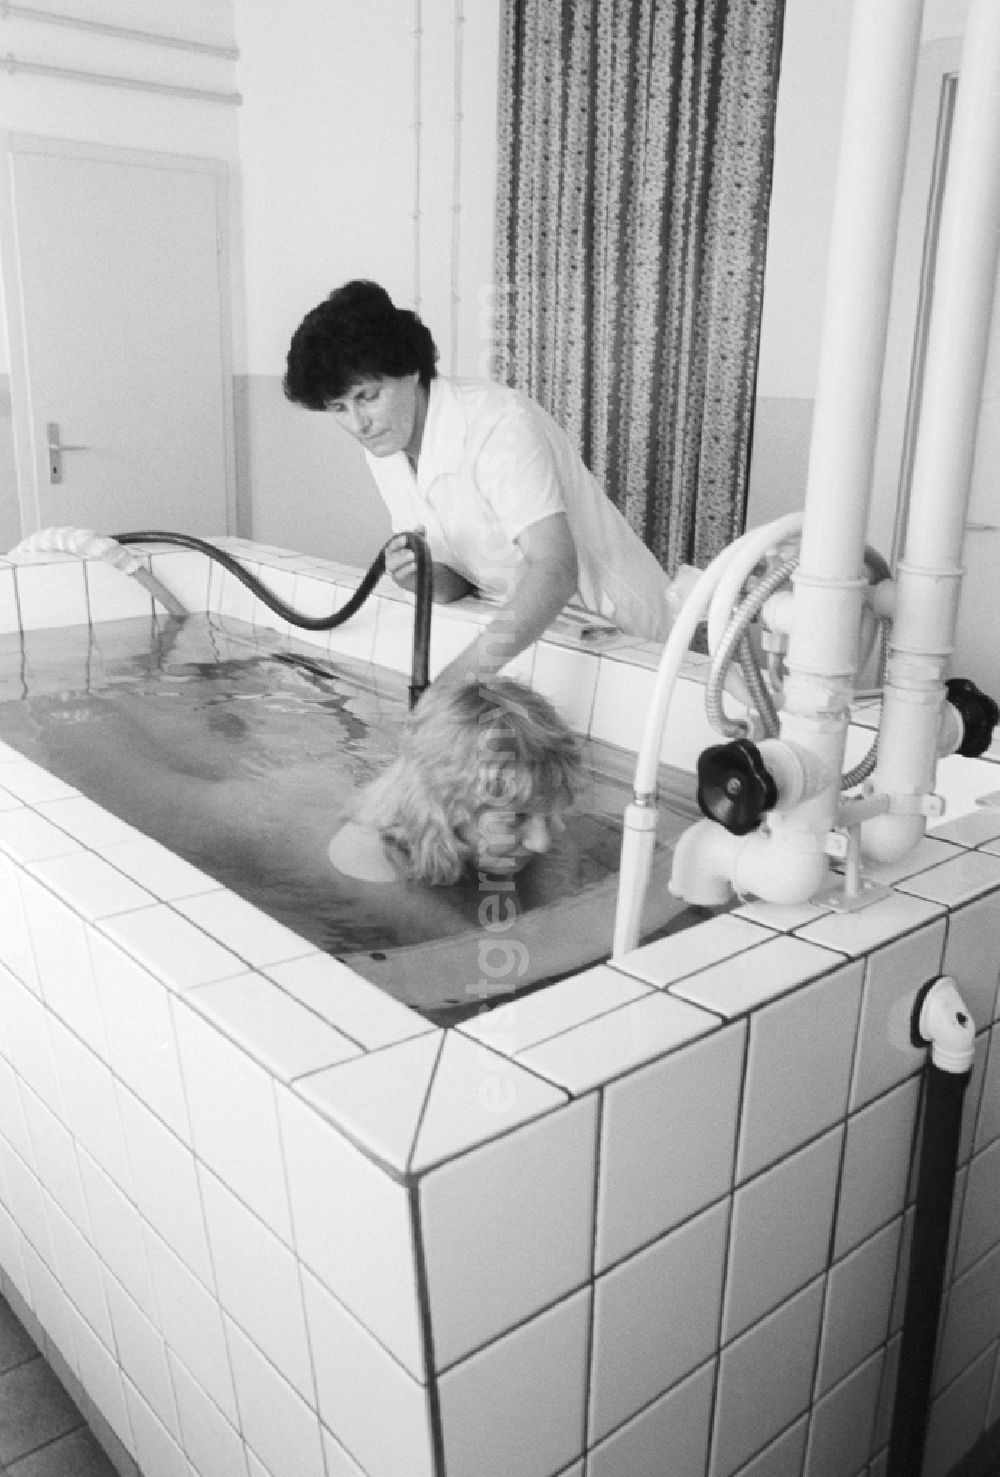 GDR photo archive: Malchow - Therapeutic underwater massages in Malchow in Mecklenburg-Western Pomerania in the field of the former GDR, German Democratic Republic